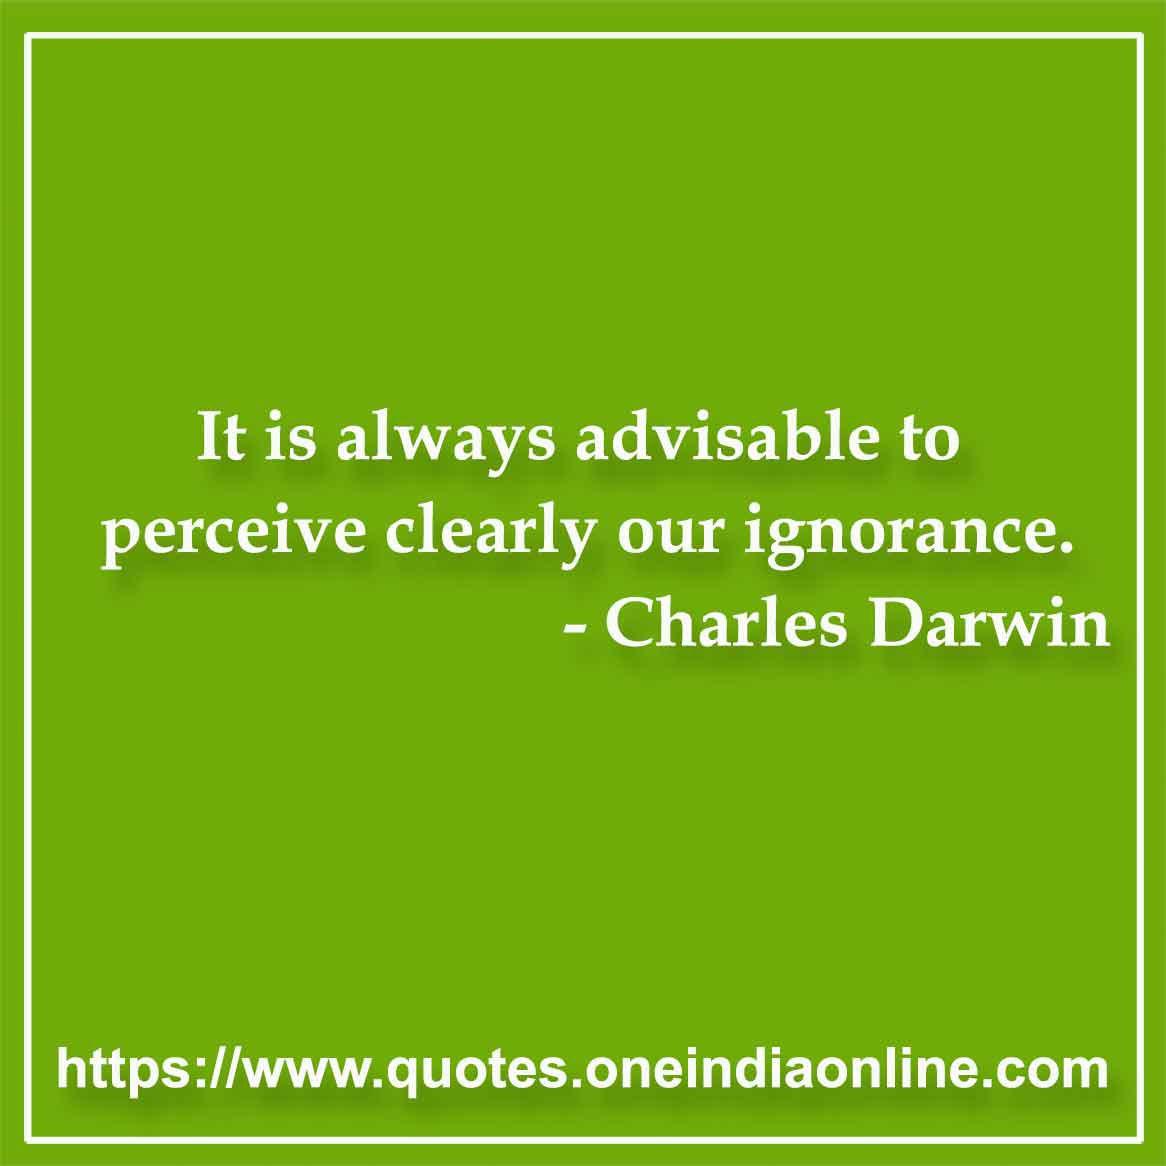 It is always advisable to perceive clearly our ignorance. 